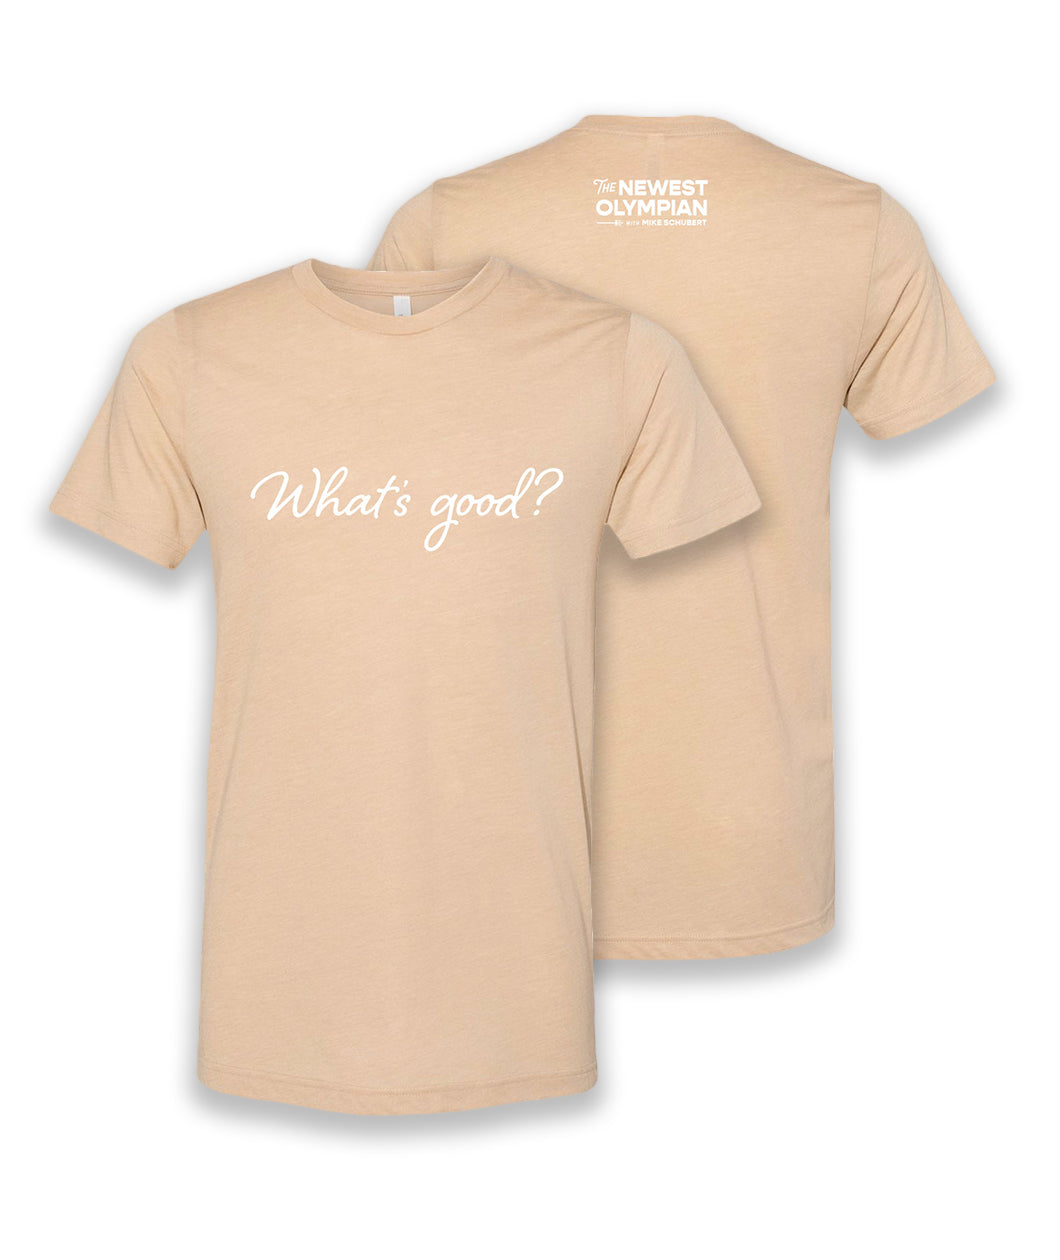 Yellow shirt with “What’s good?” on the front across the chest in white cursive font. On the back below the collar, “The Newest Olympian” is written in white sans serif font - from The Newest Olympian